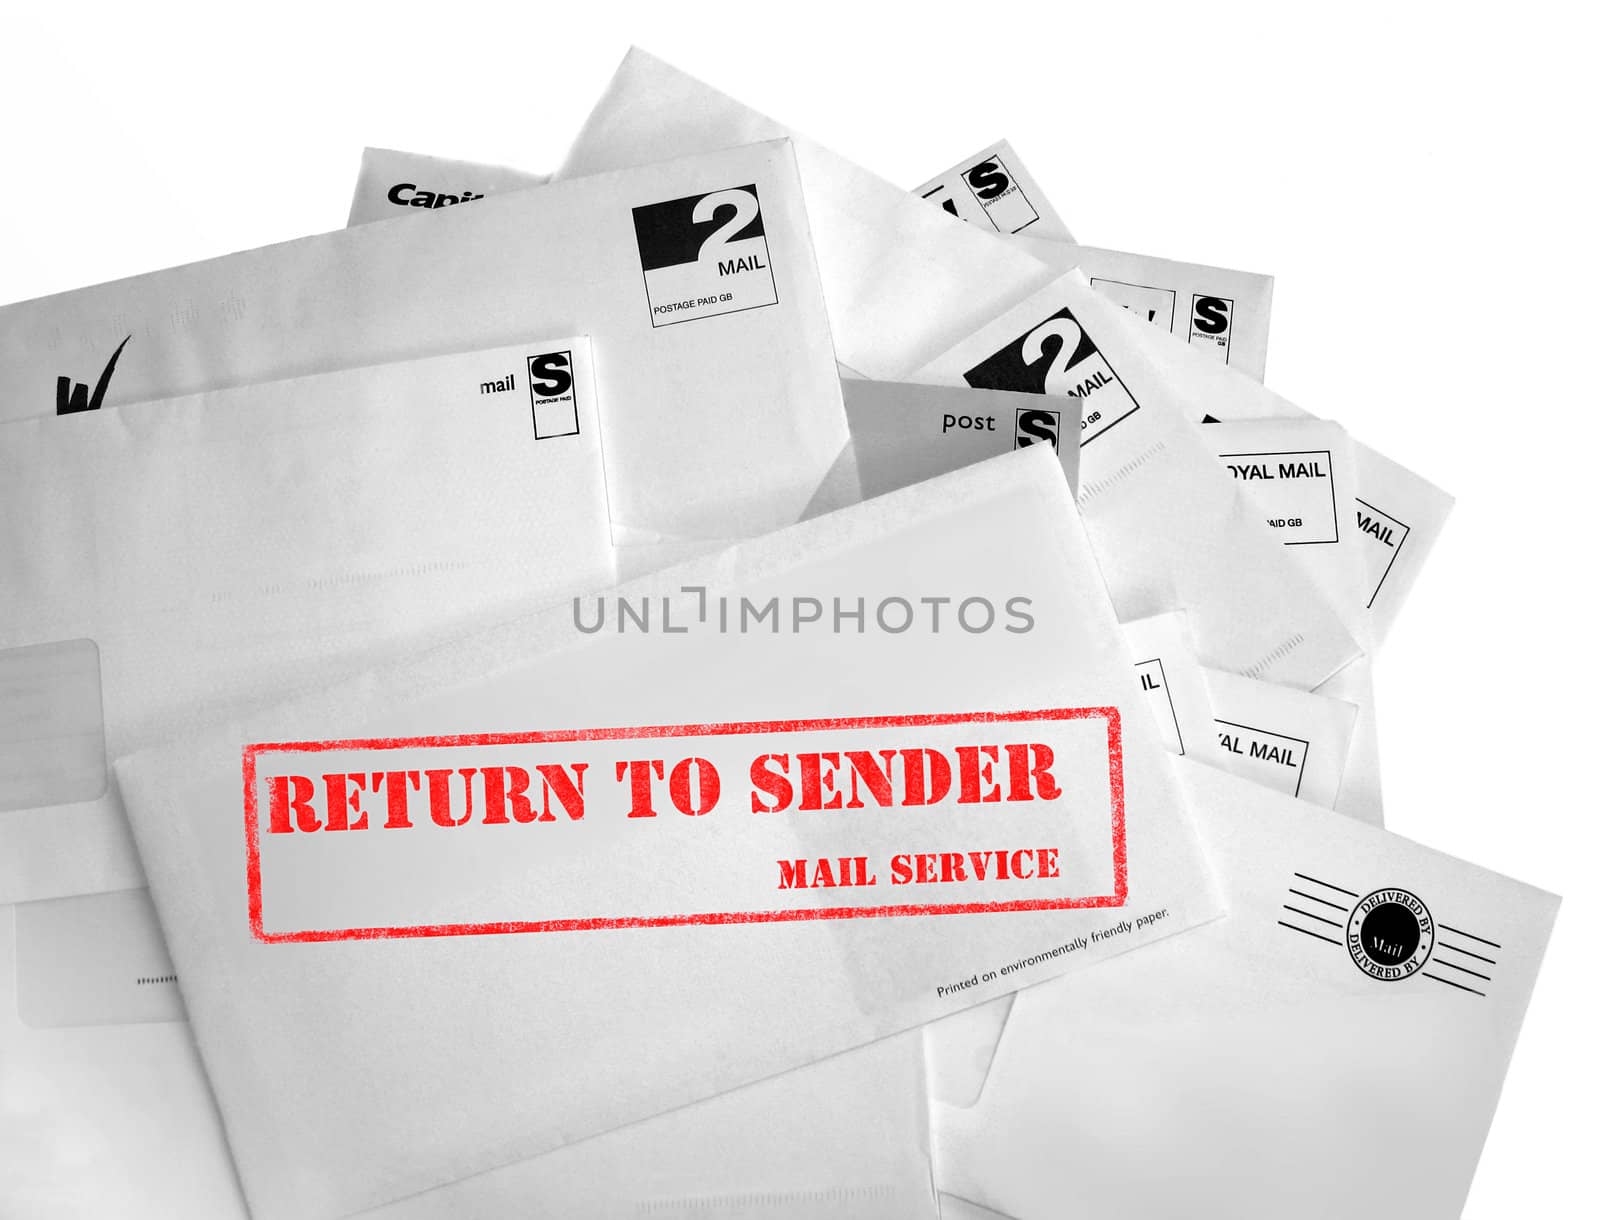 Unwanted mail, bills or junk mail. Also ideal for ecological concepts which highlight the amount of paper wasted through junk mail and advertising